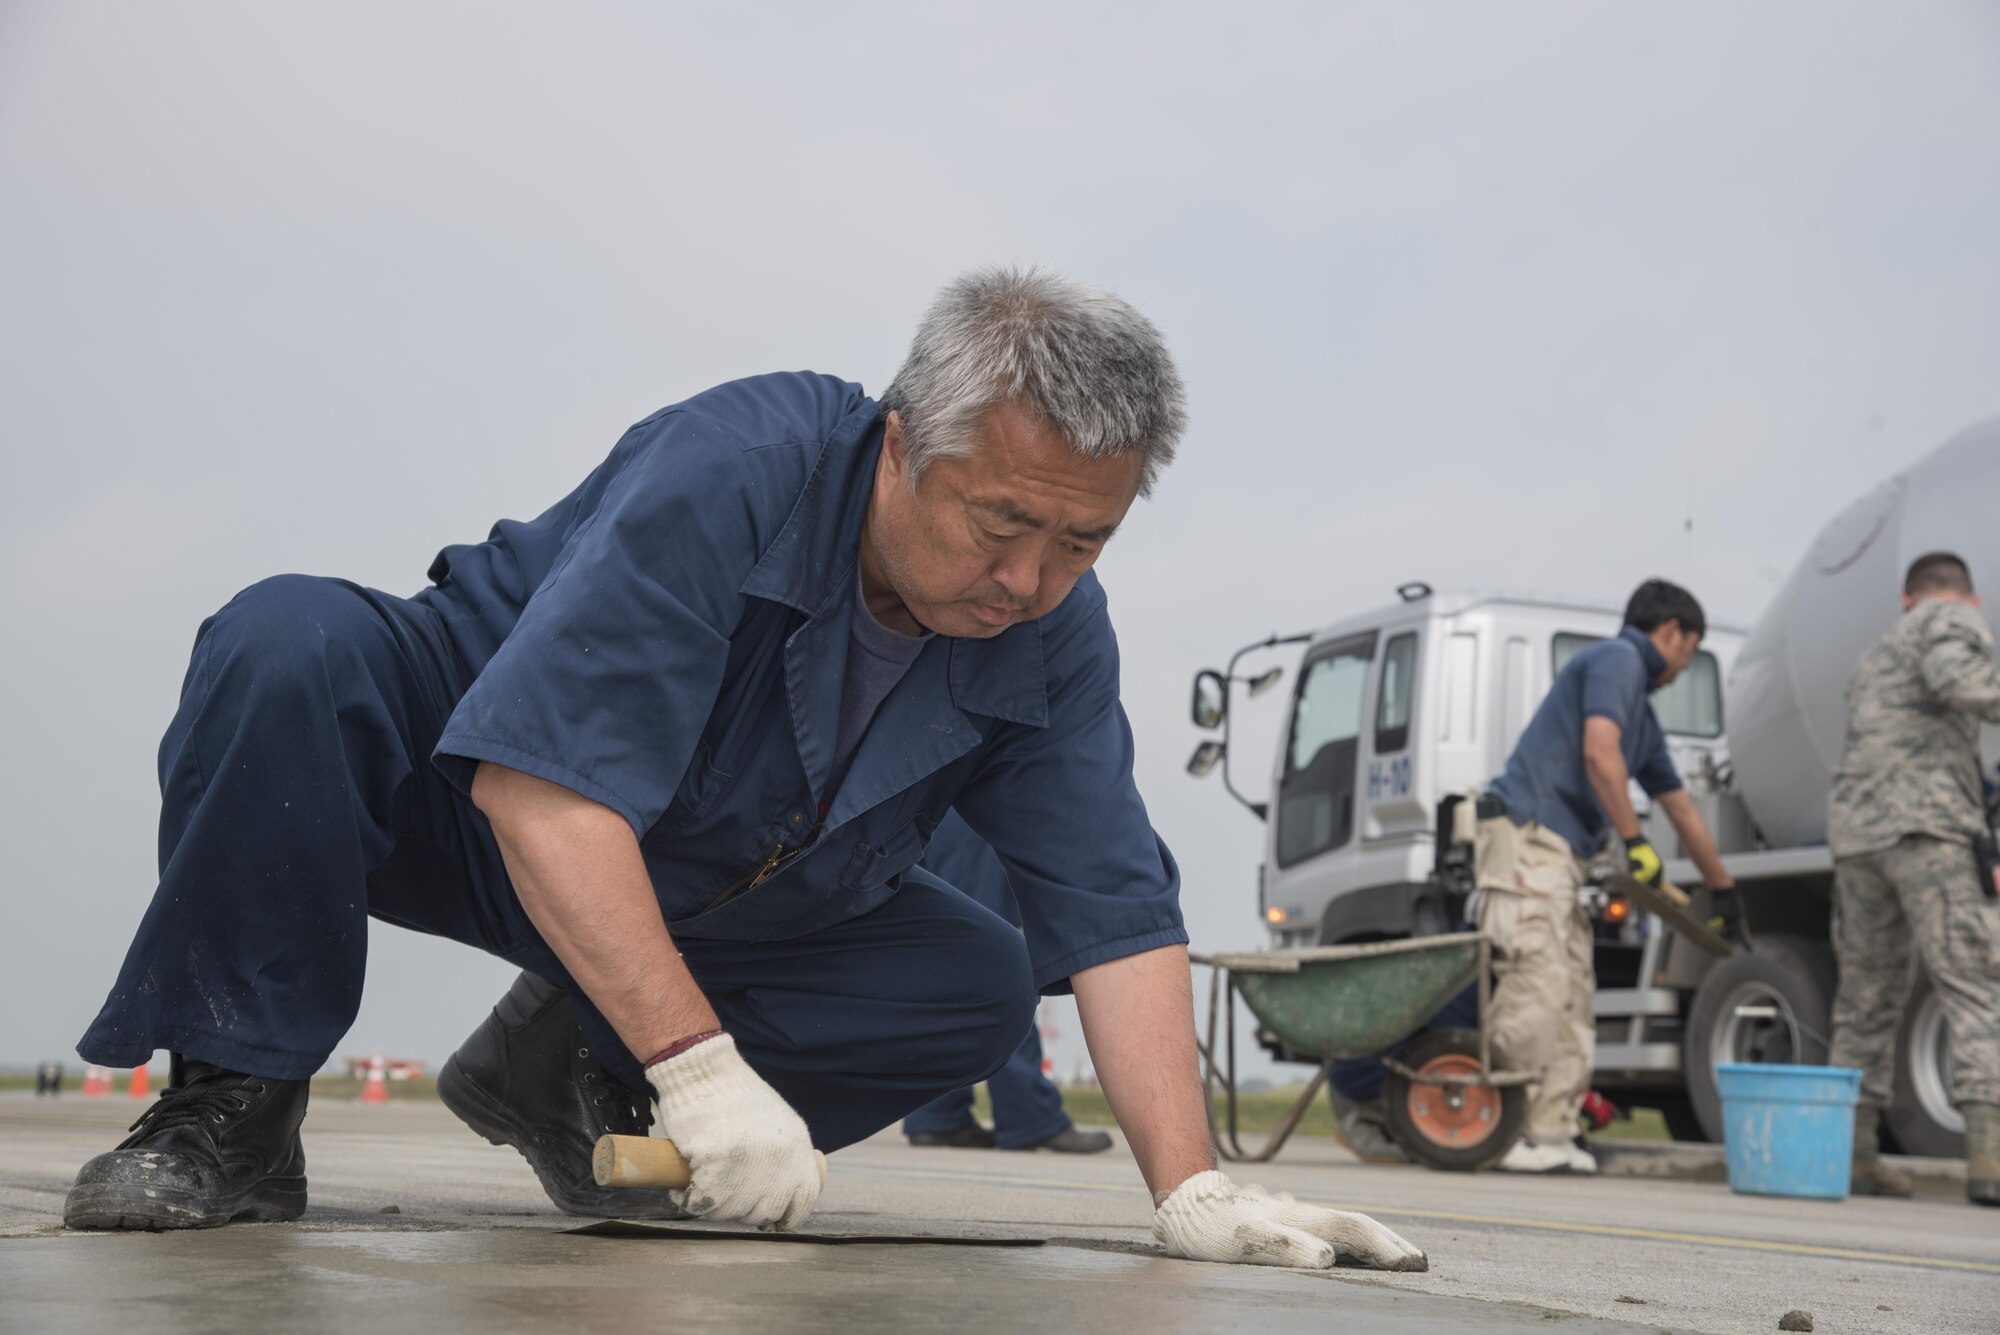 Youichi Yamada, a Japanese contractor, uses a trowel to put finishing touches on newly laid concrete at Misawa Air Base, Japan, May 23, 2017. AFter concrete is laid down, it is smoothed out with a trowel, which pushes heavier rocks down and provides a clean, smooth surface. (U.S. Air Force photo by Airman 1st Class Sadie Colbert)